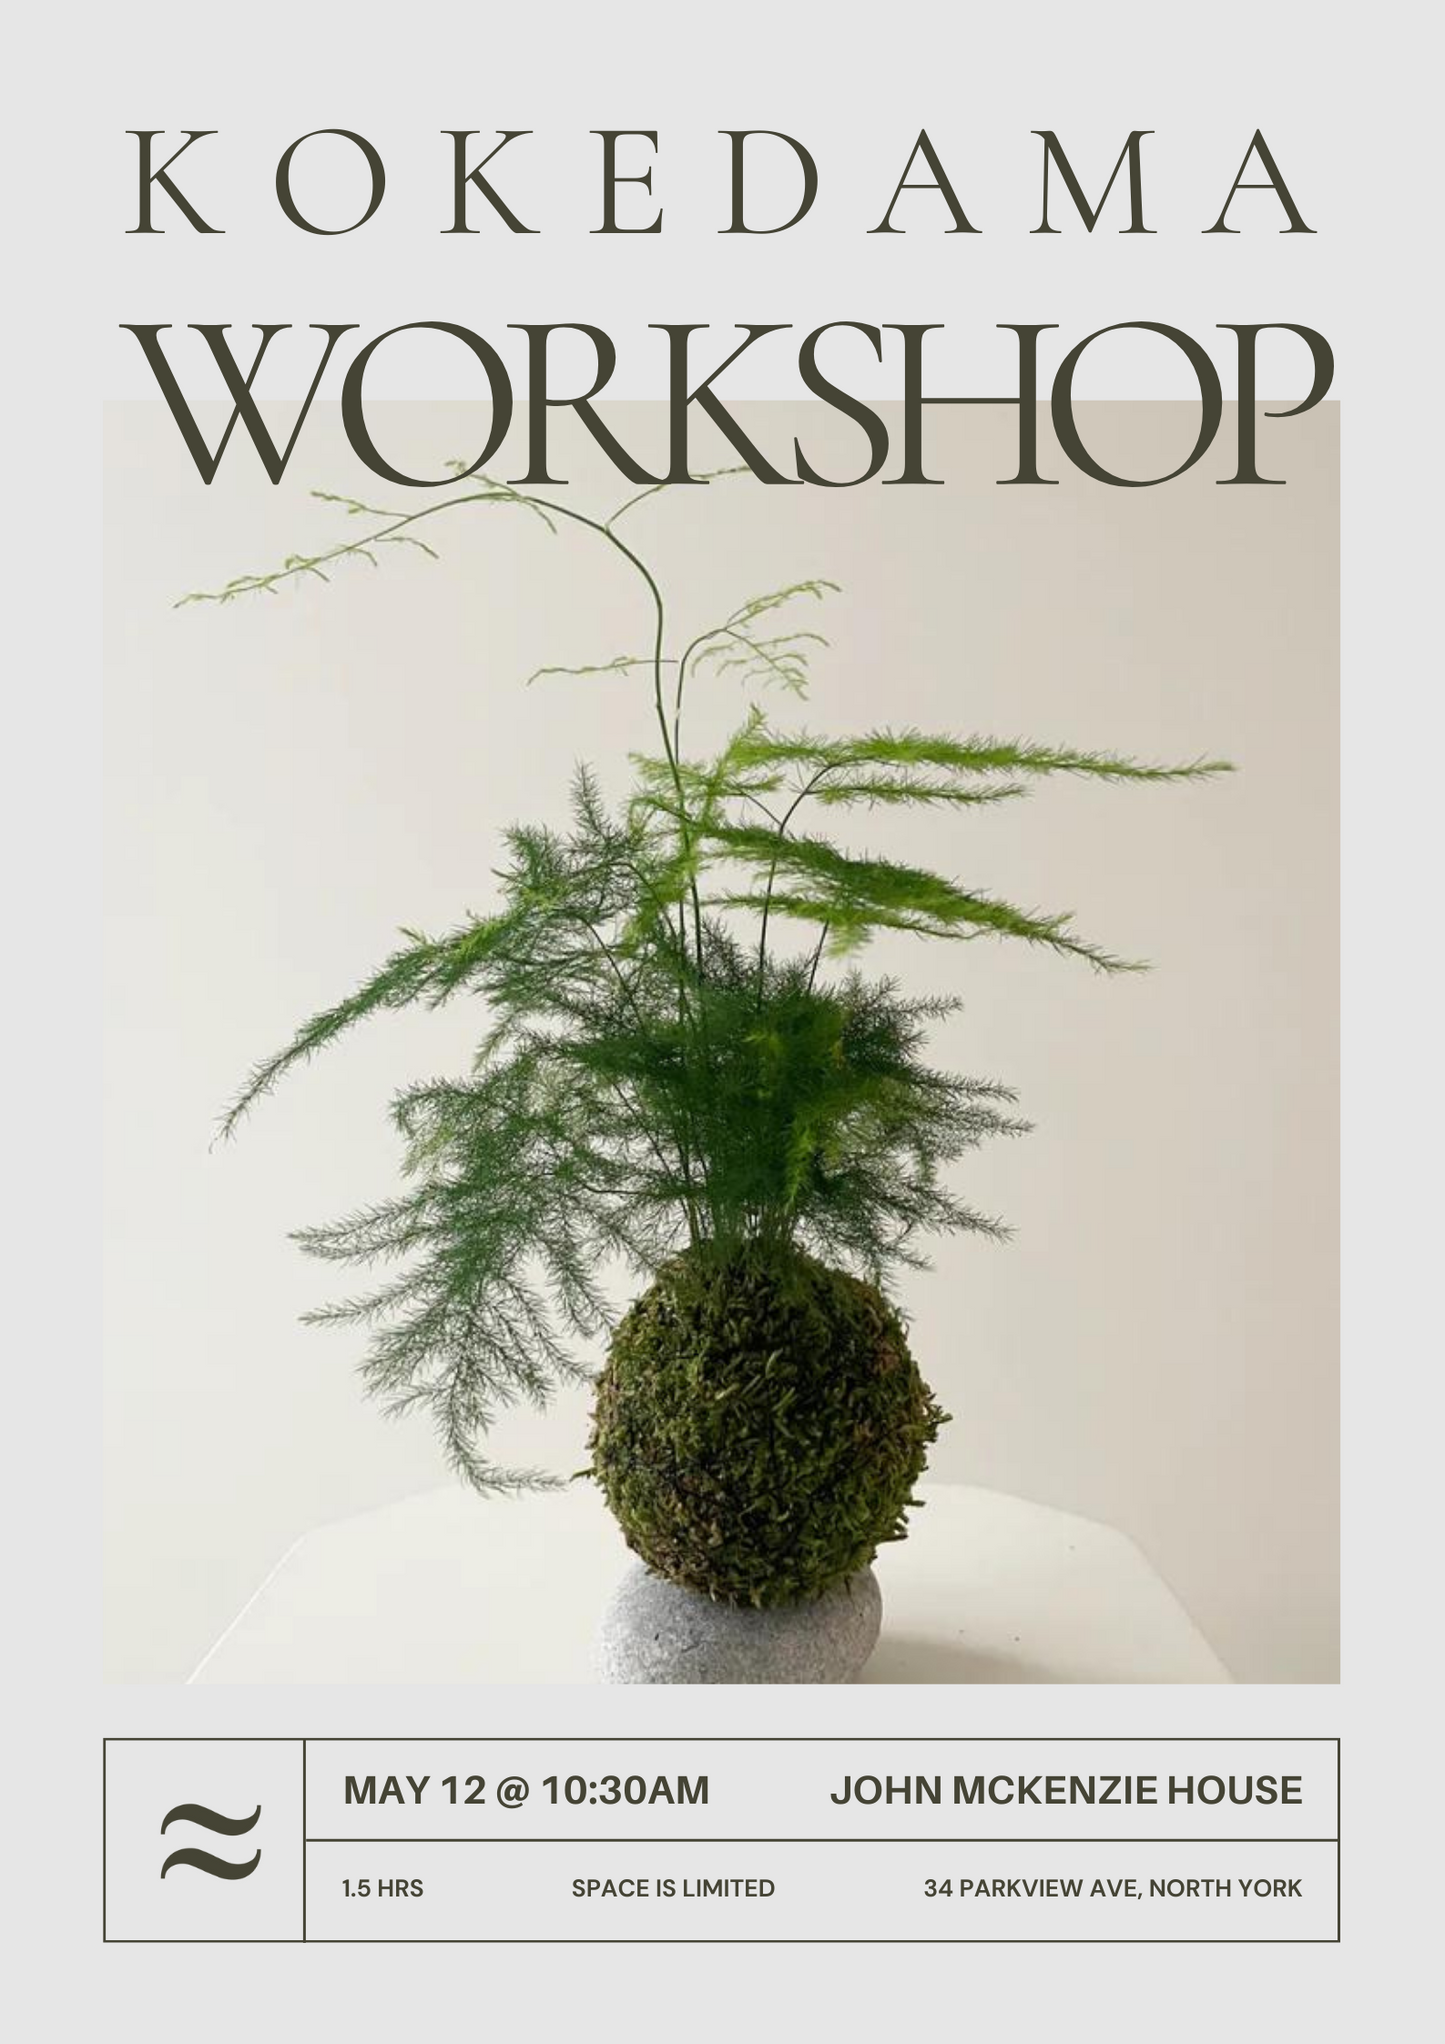 SOLD OUT Kokedama workshop: May 12 @ 10:30am